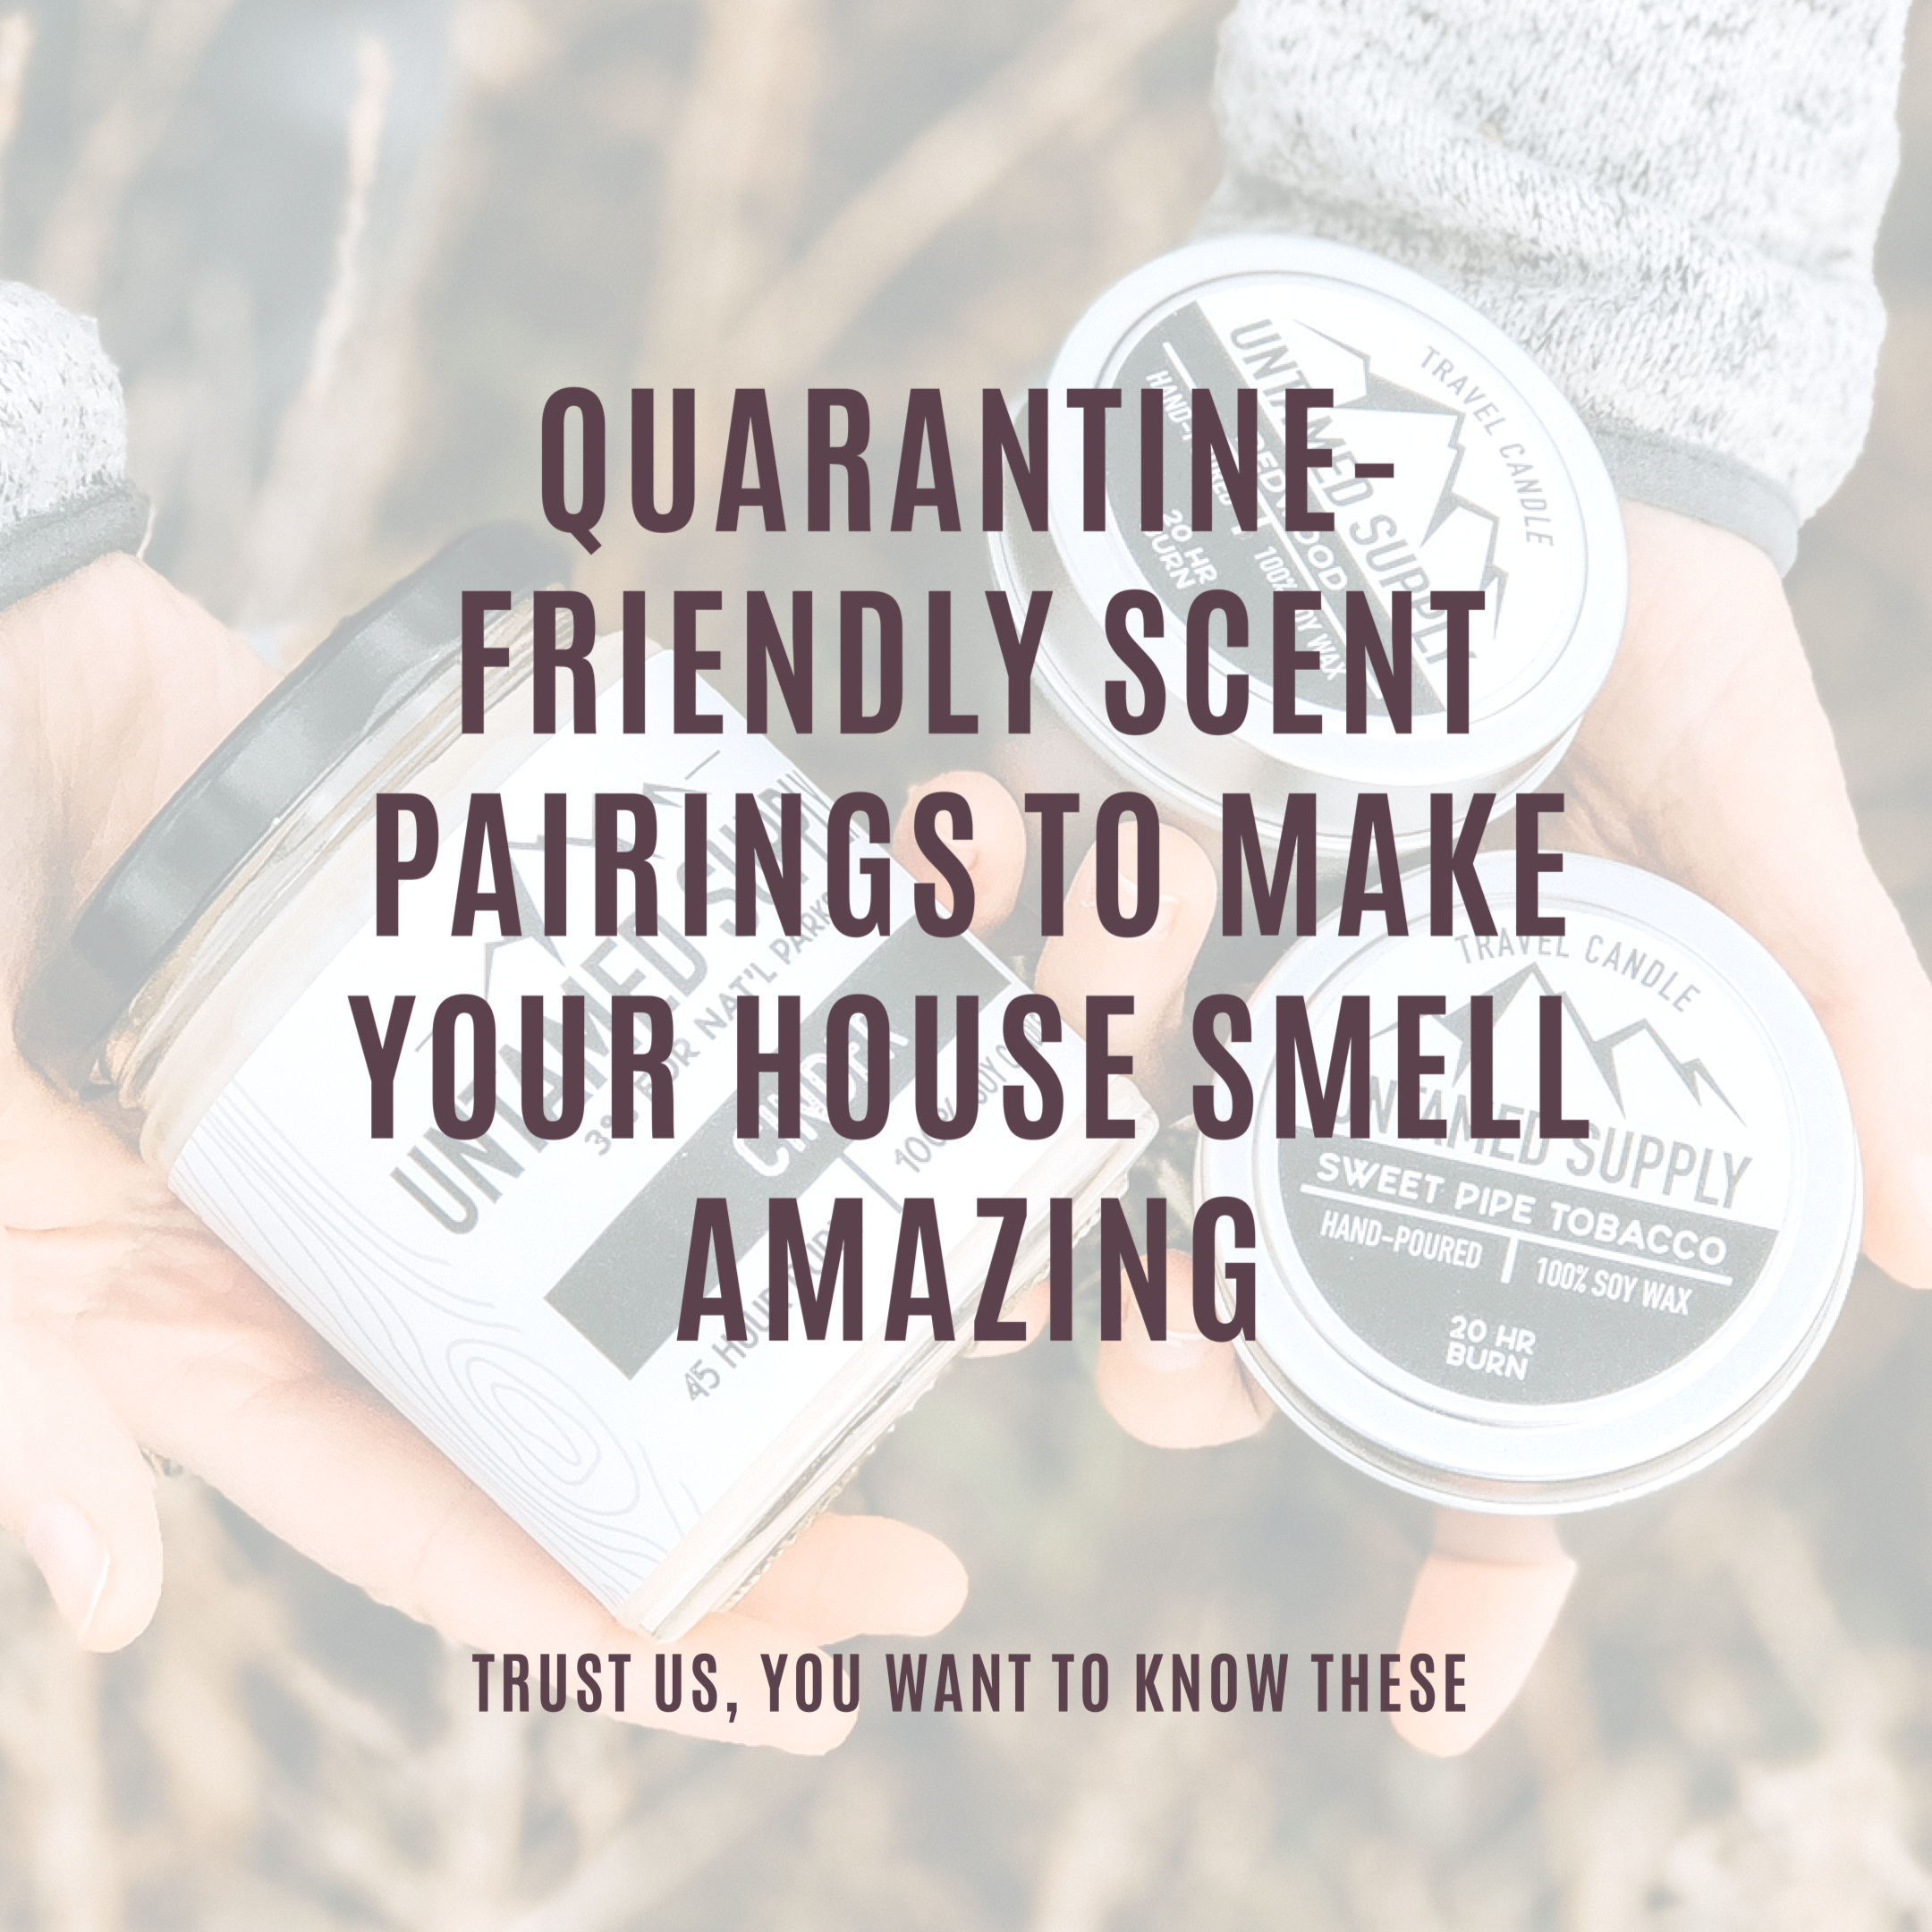 Quarantine-Friendly Scent Pairings to Make your House Smell Amazing